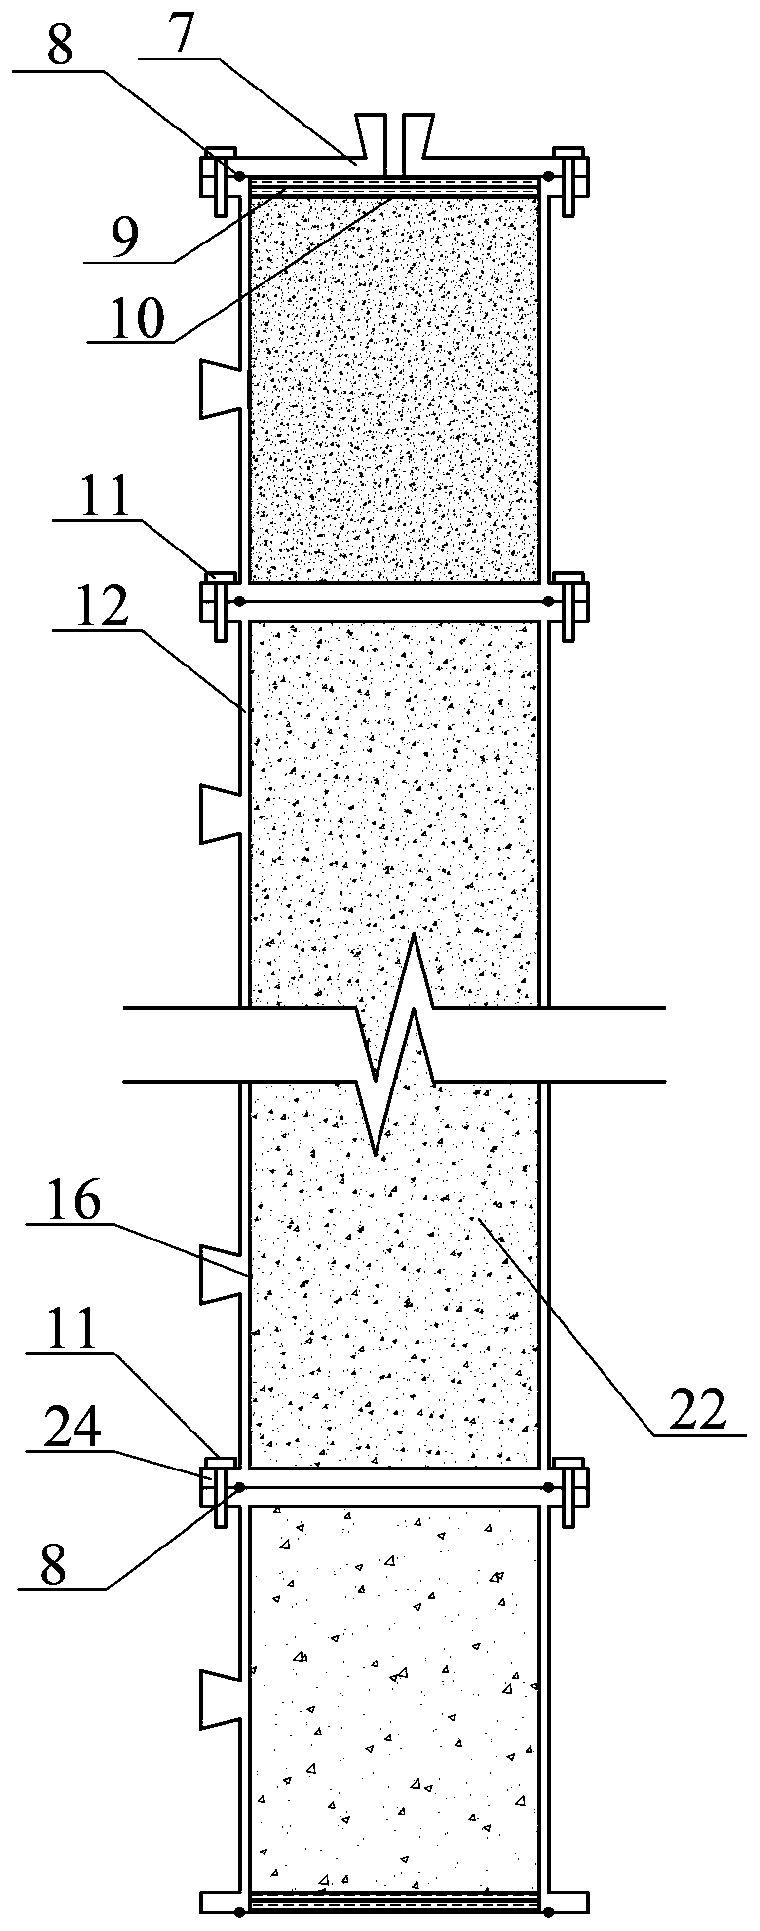 Permeation measuring device and method for layered sand migration process under different osmotic gradients